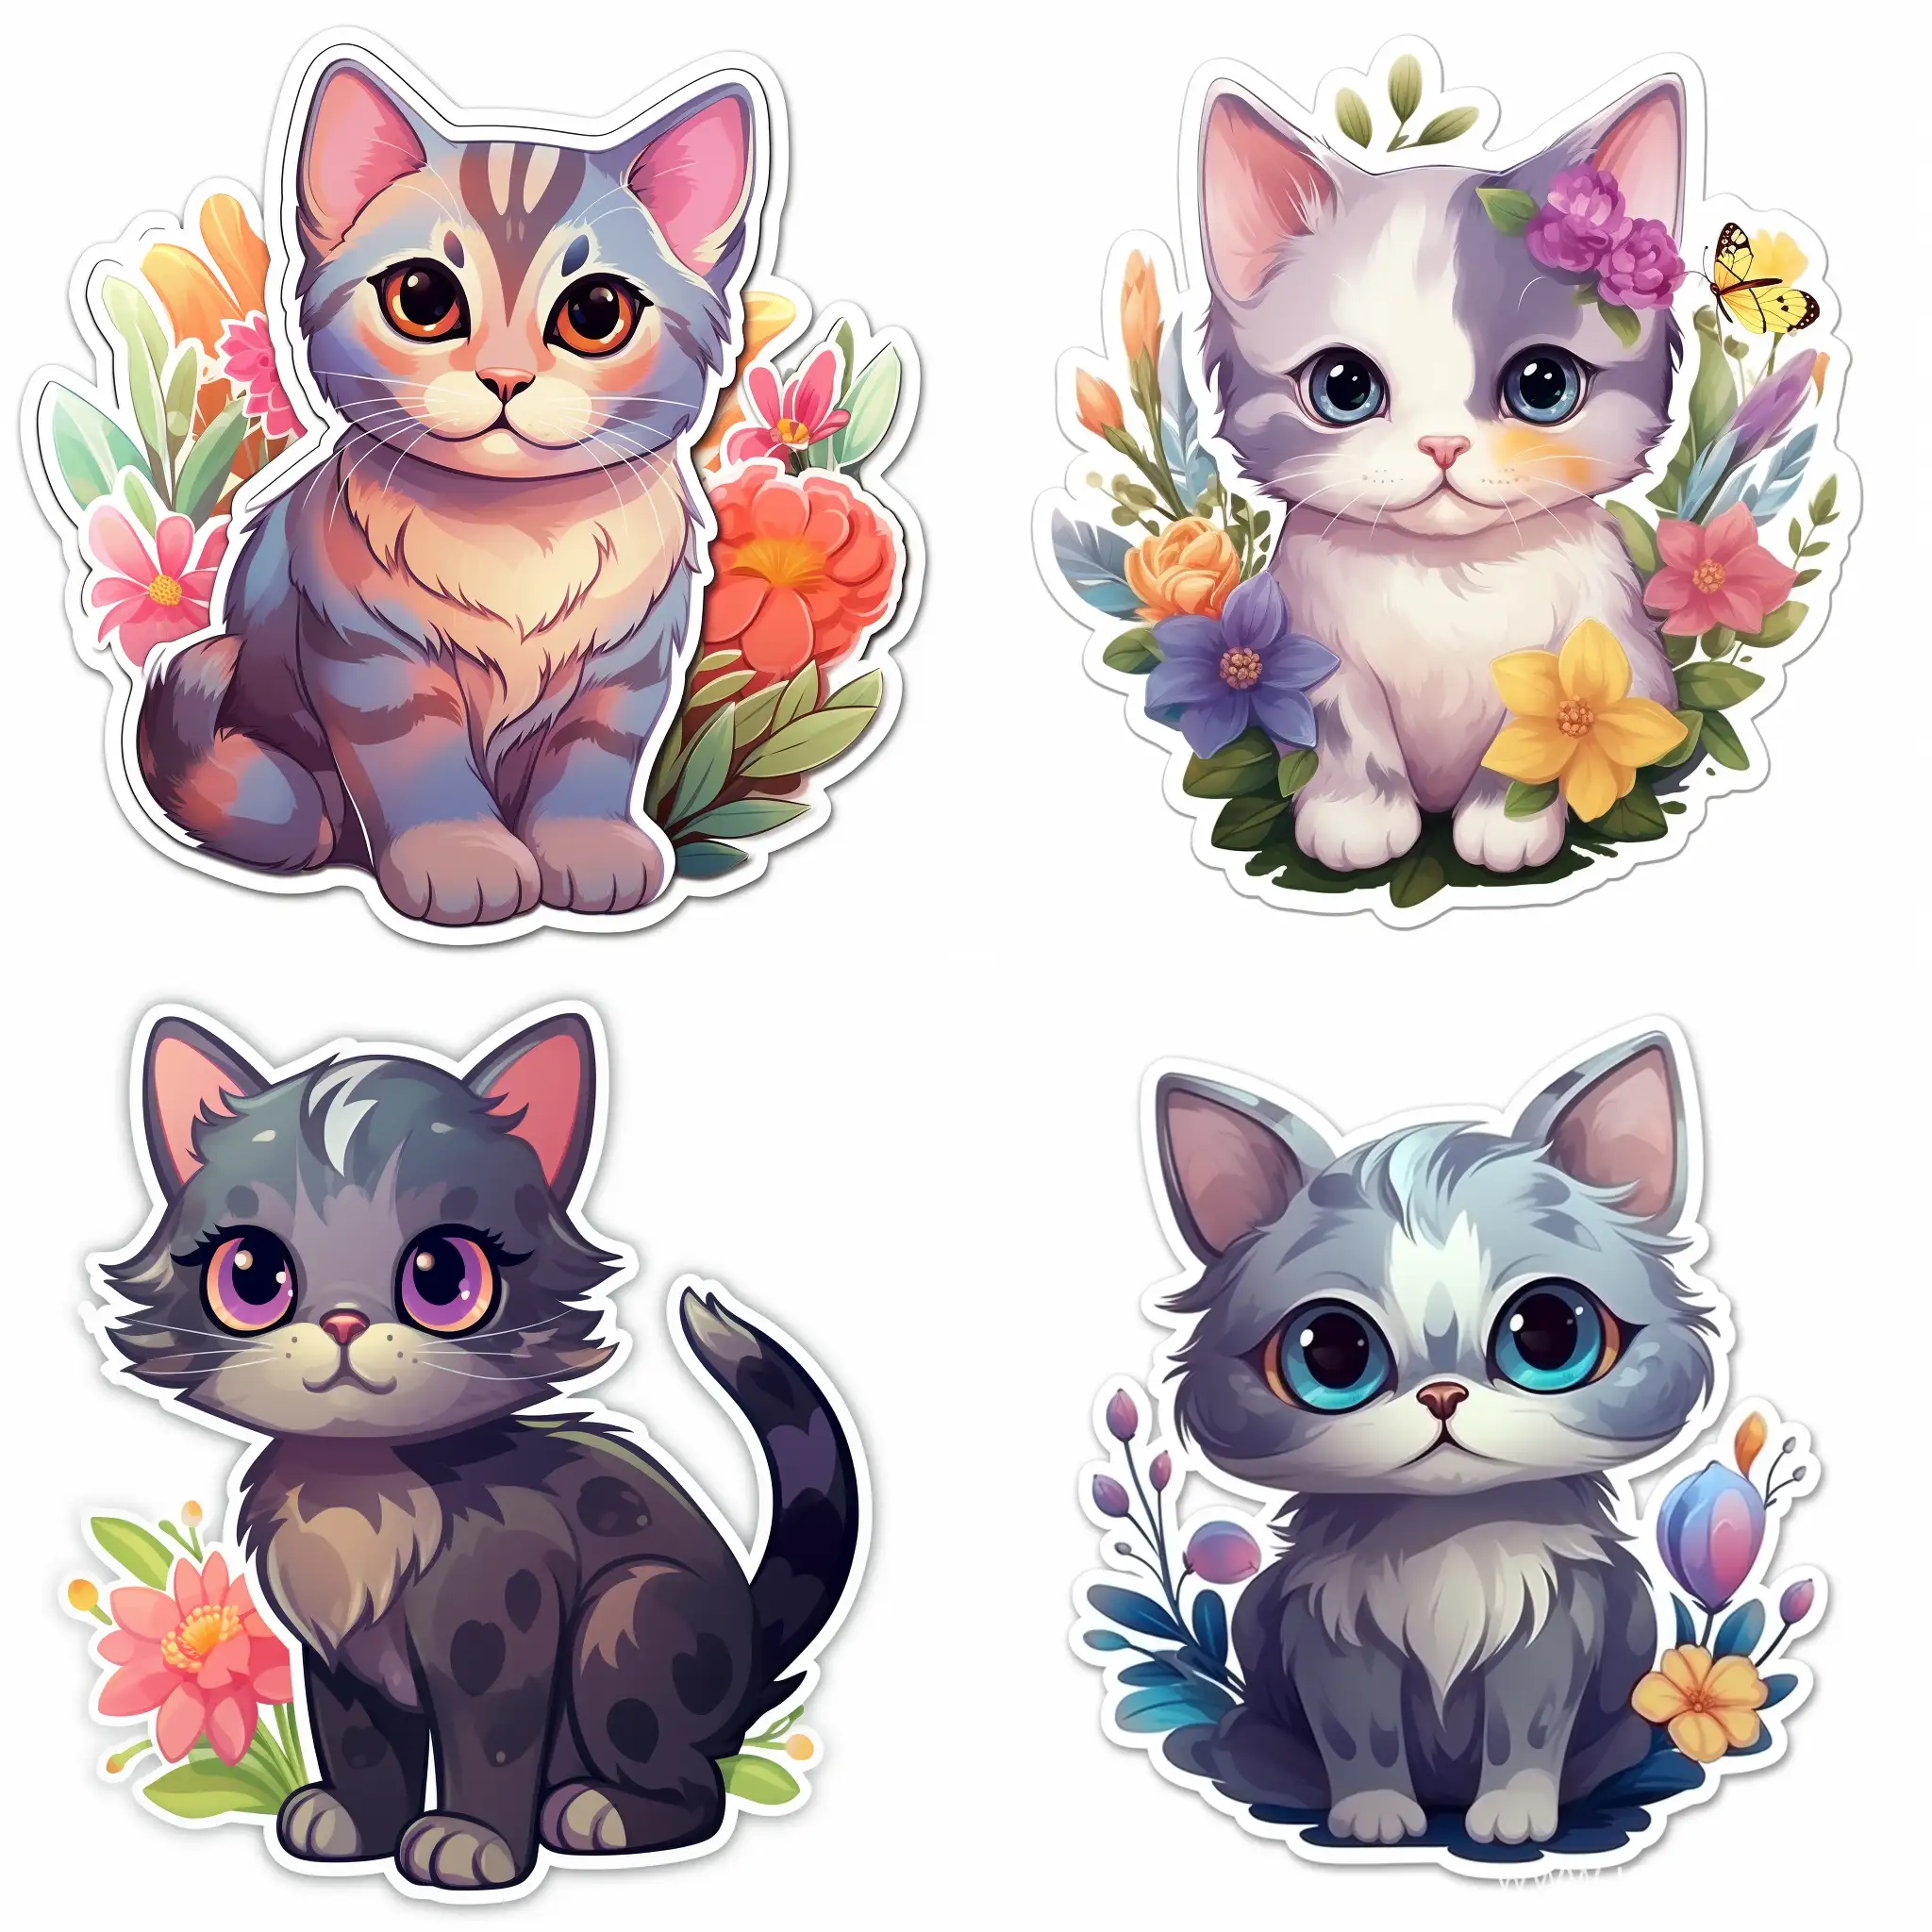 sticker, heartwarming and charming cat, evoke feelings of cuteness and endearment, playful poses, expressive eyes, accessories that enhance the overall charm, vibrant colors, background elements that would complement the cute cat, visually appealing to viewers.